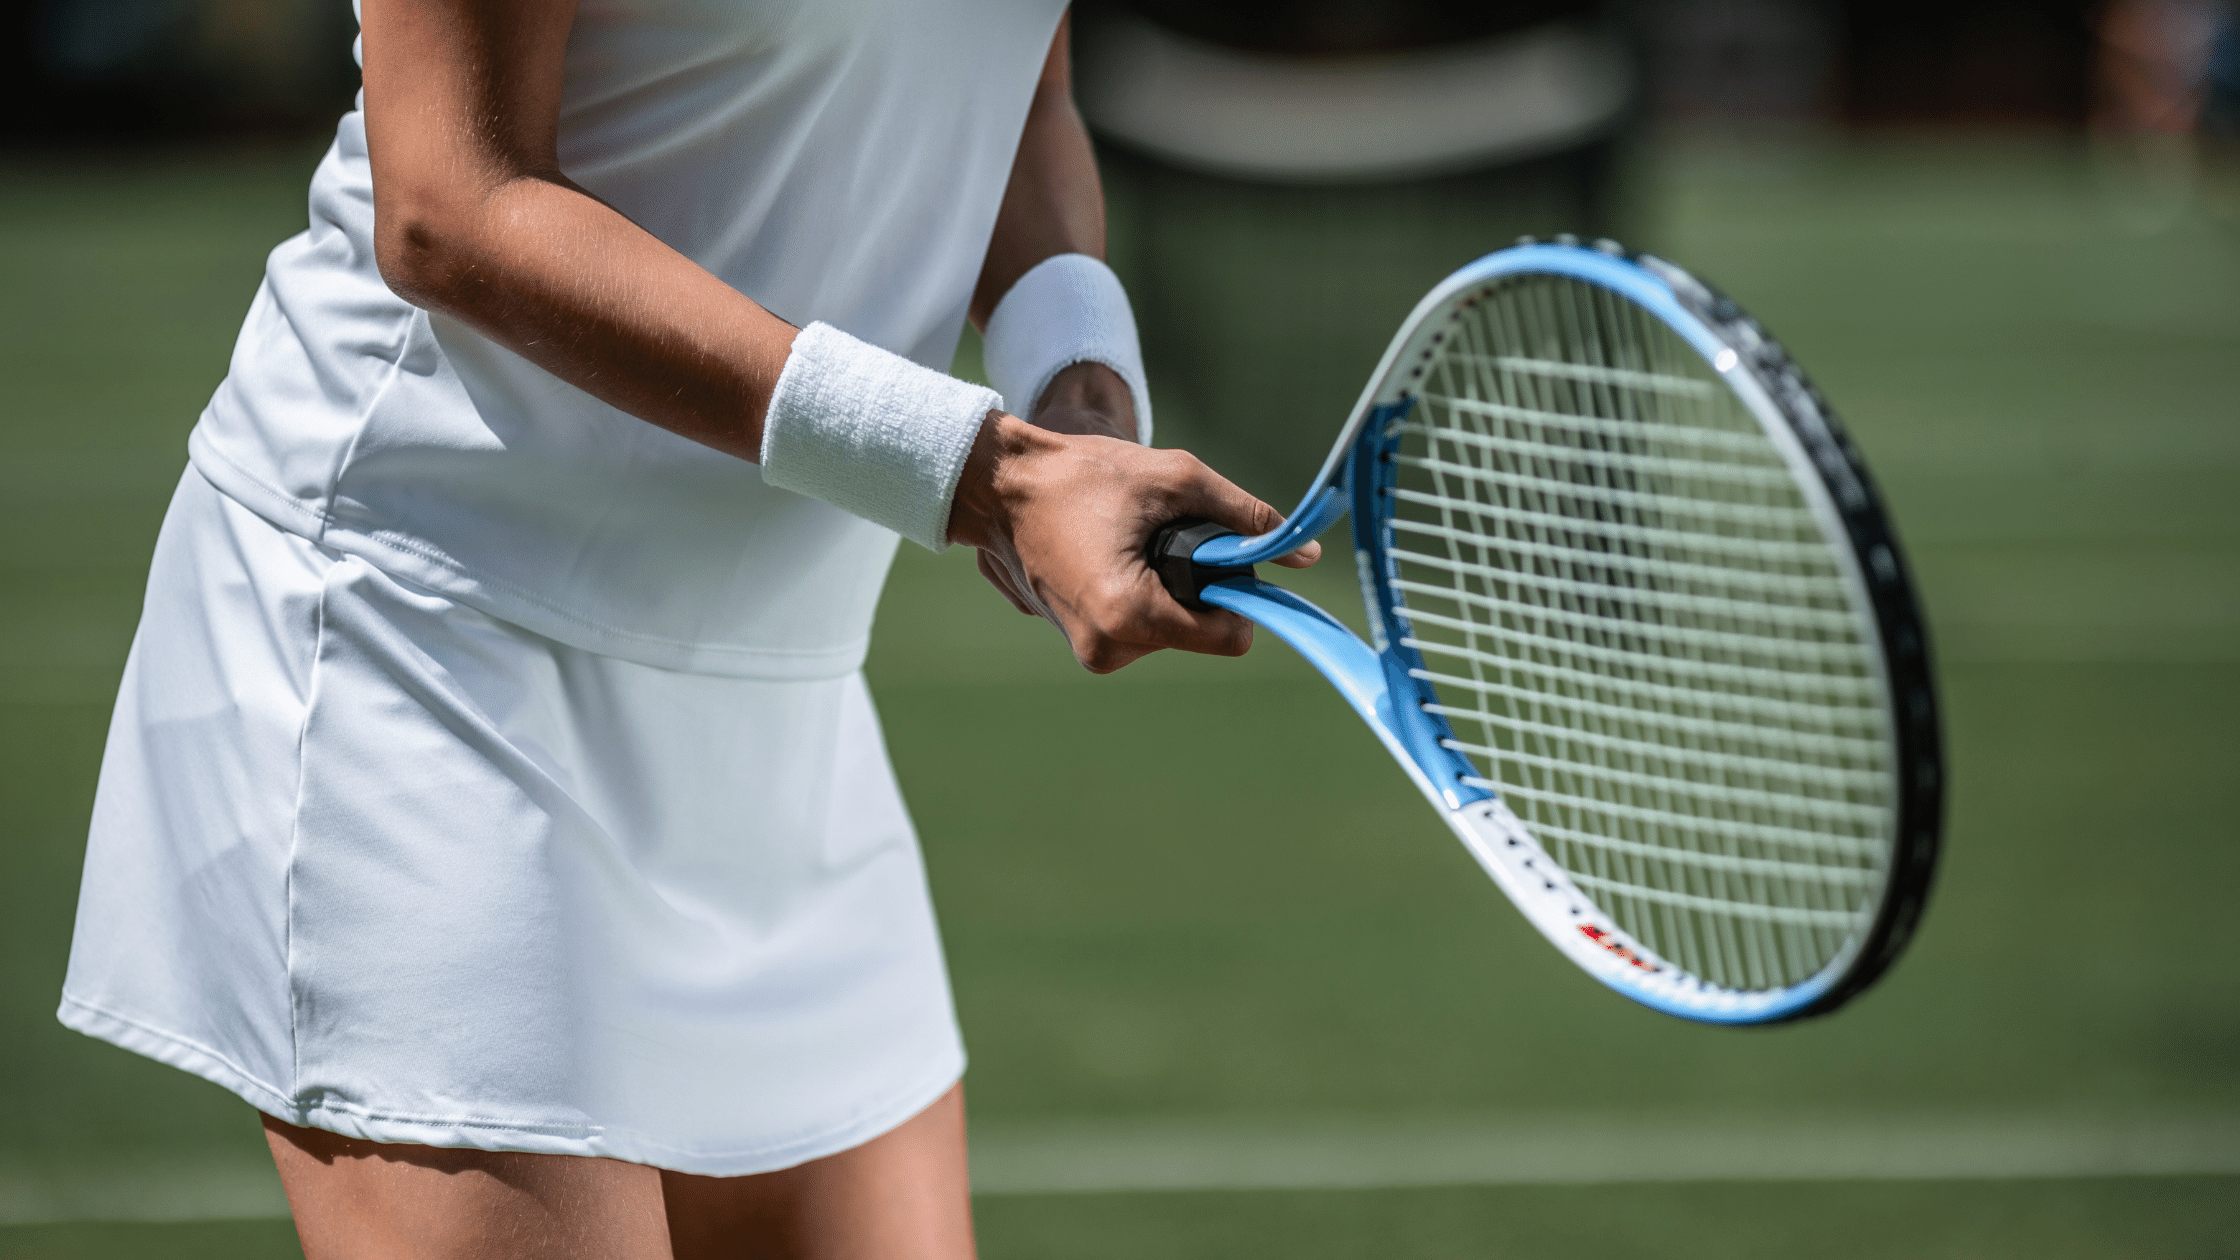 Best Gear For Tennis Injuries - Get Relief Today